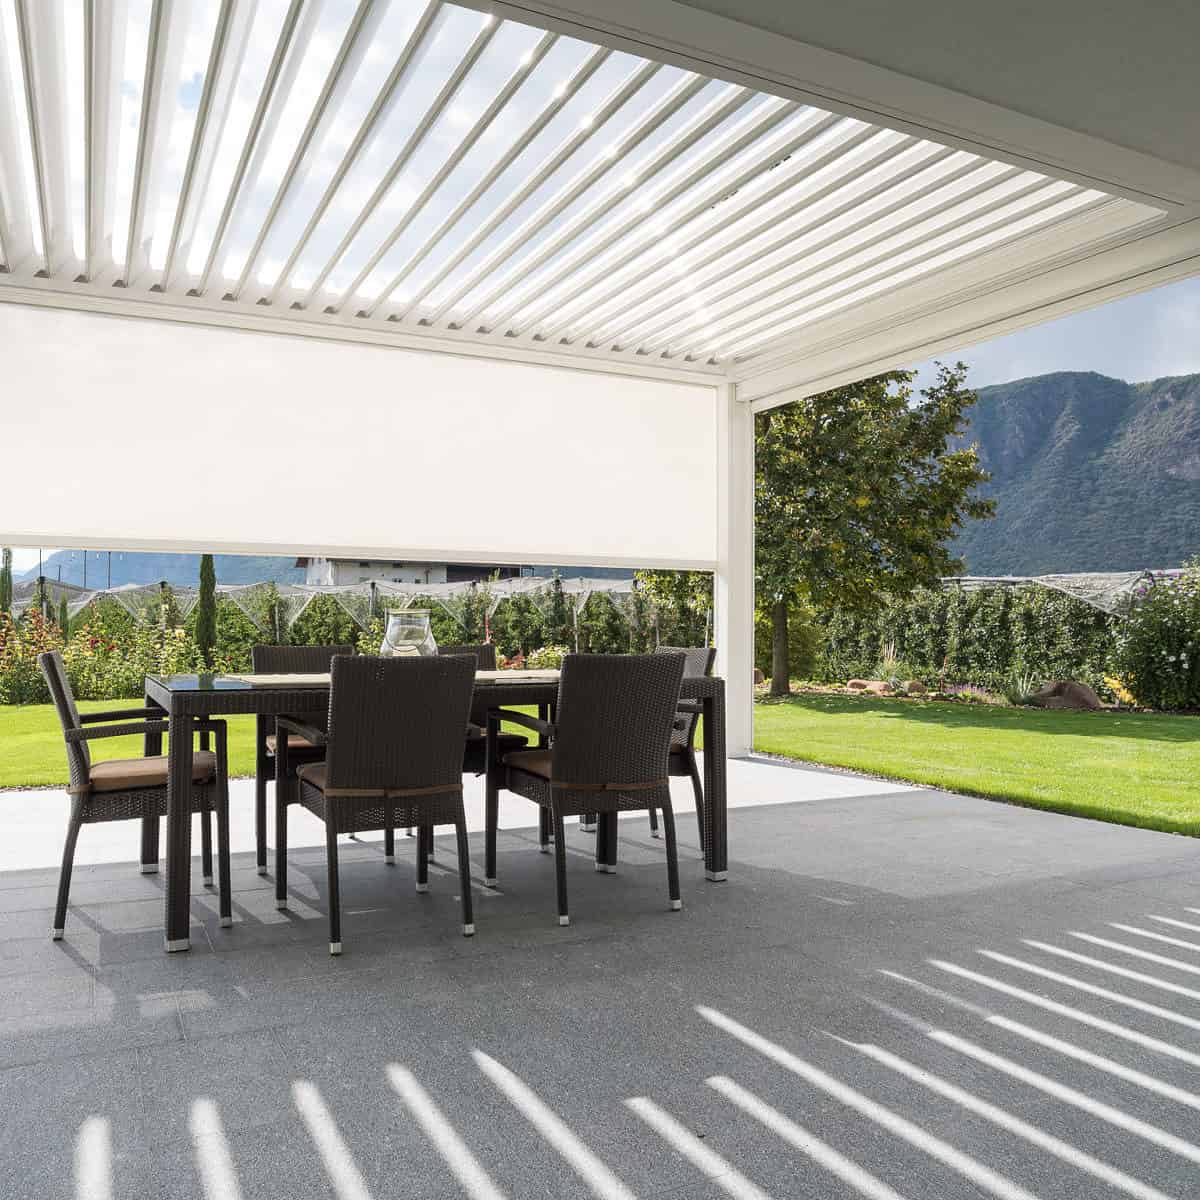 This image showcases the view from inside a KE Kedry Prime louvred roof pergola in white. The adjustable louvres of the Kedry Prime pergola allow for customizable levels of sunlight and shade, creating a comfortable and inviting space to enjoy the outdoors. With its sleek and modern design, the Kedry Prime pergola adds an attractive element to the outdoor space while also providing practical benefits. The white color of the pergola blends seamlessly with the patio and surrounding landscaping, creating a unified and cohesive outdoor living space. The view from inside the pergola highlights the beautiful outdoor environment, with lush greenery and natural light flooding the space. With the KE Kedry Prime louvred roof pergola, you can enjoy the best of both worlds - the beauty of the outdoors with the comfort and convenience of a covered outdoor space.